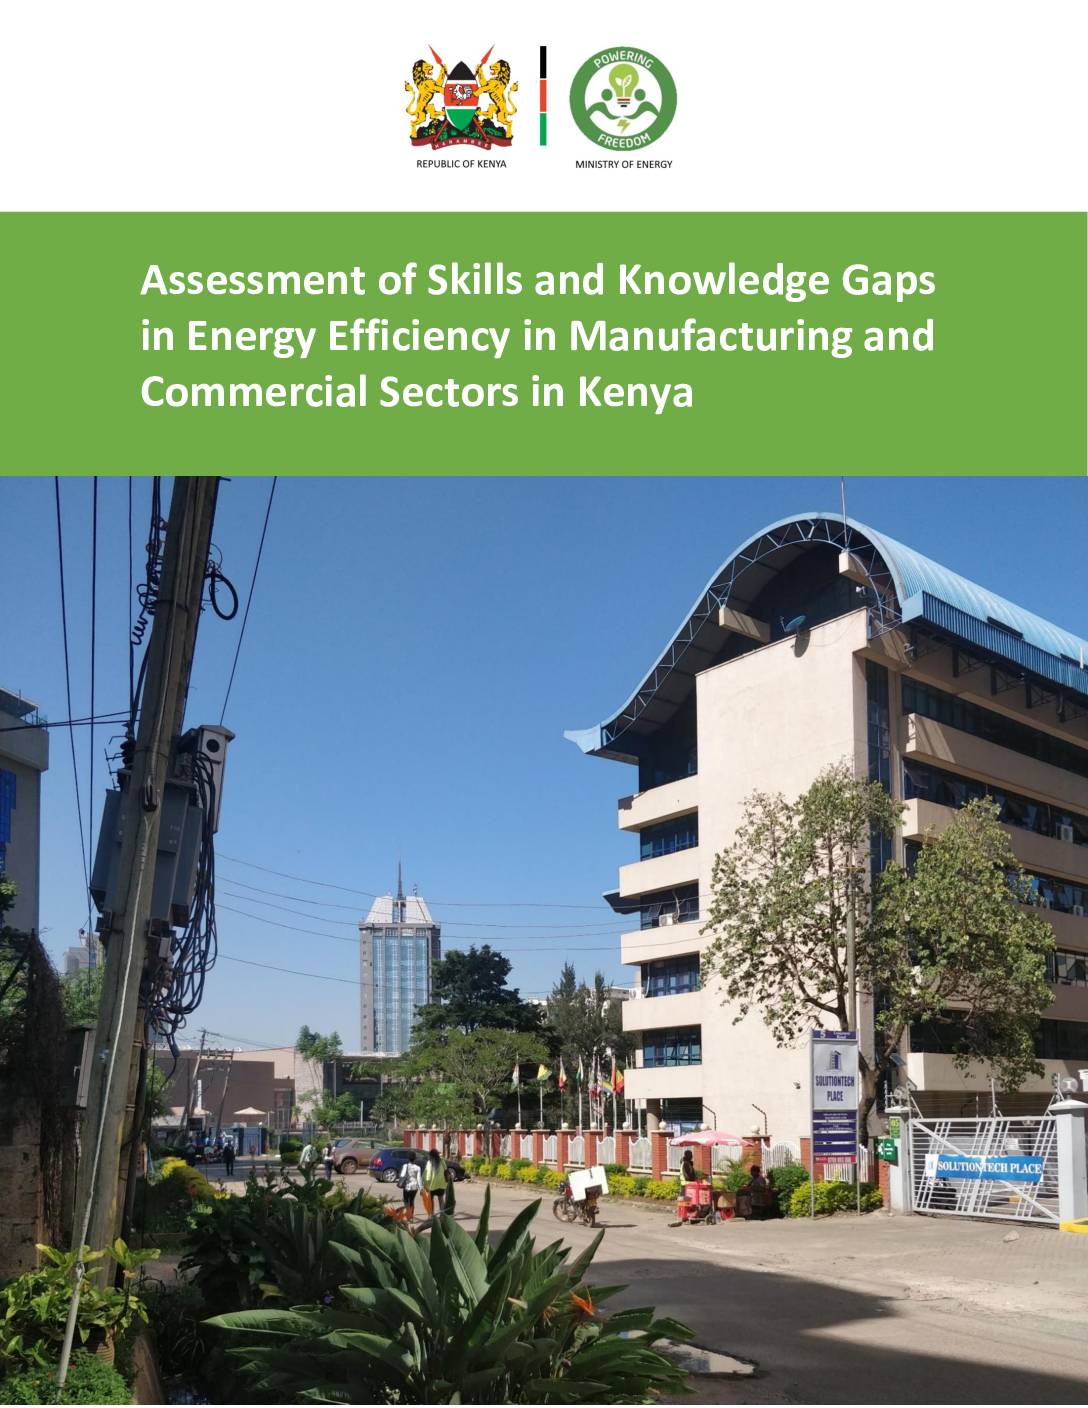 Assessment of Skills and Knowledge Gaps in Energy Efficiency in Manufacturing and Commercial Sectors in Kenya